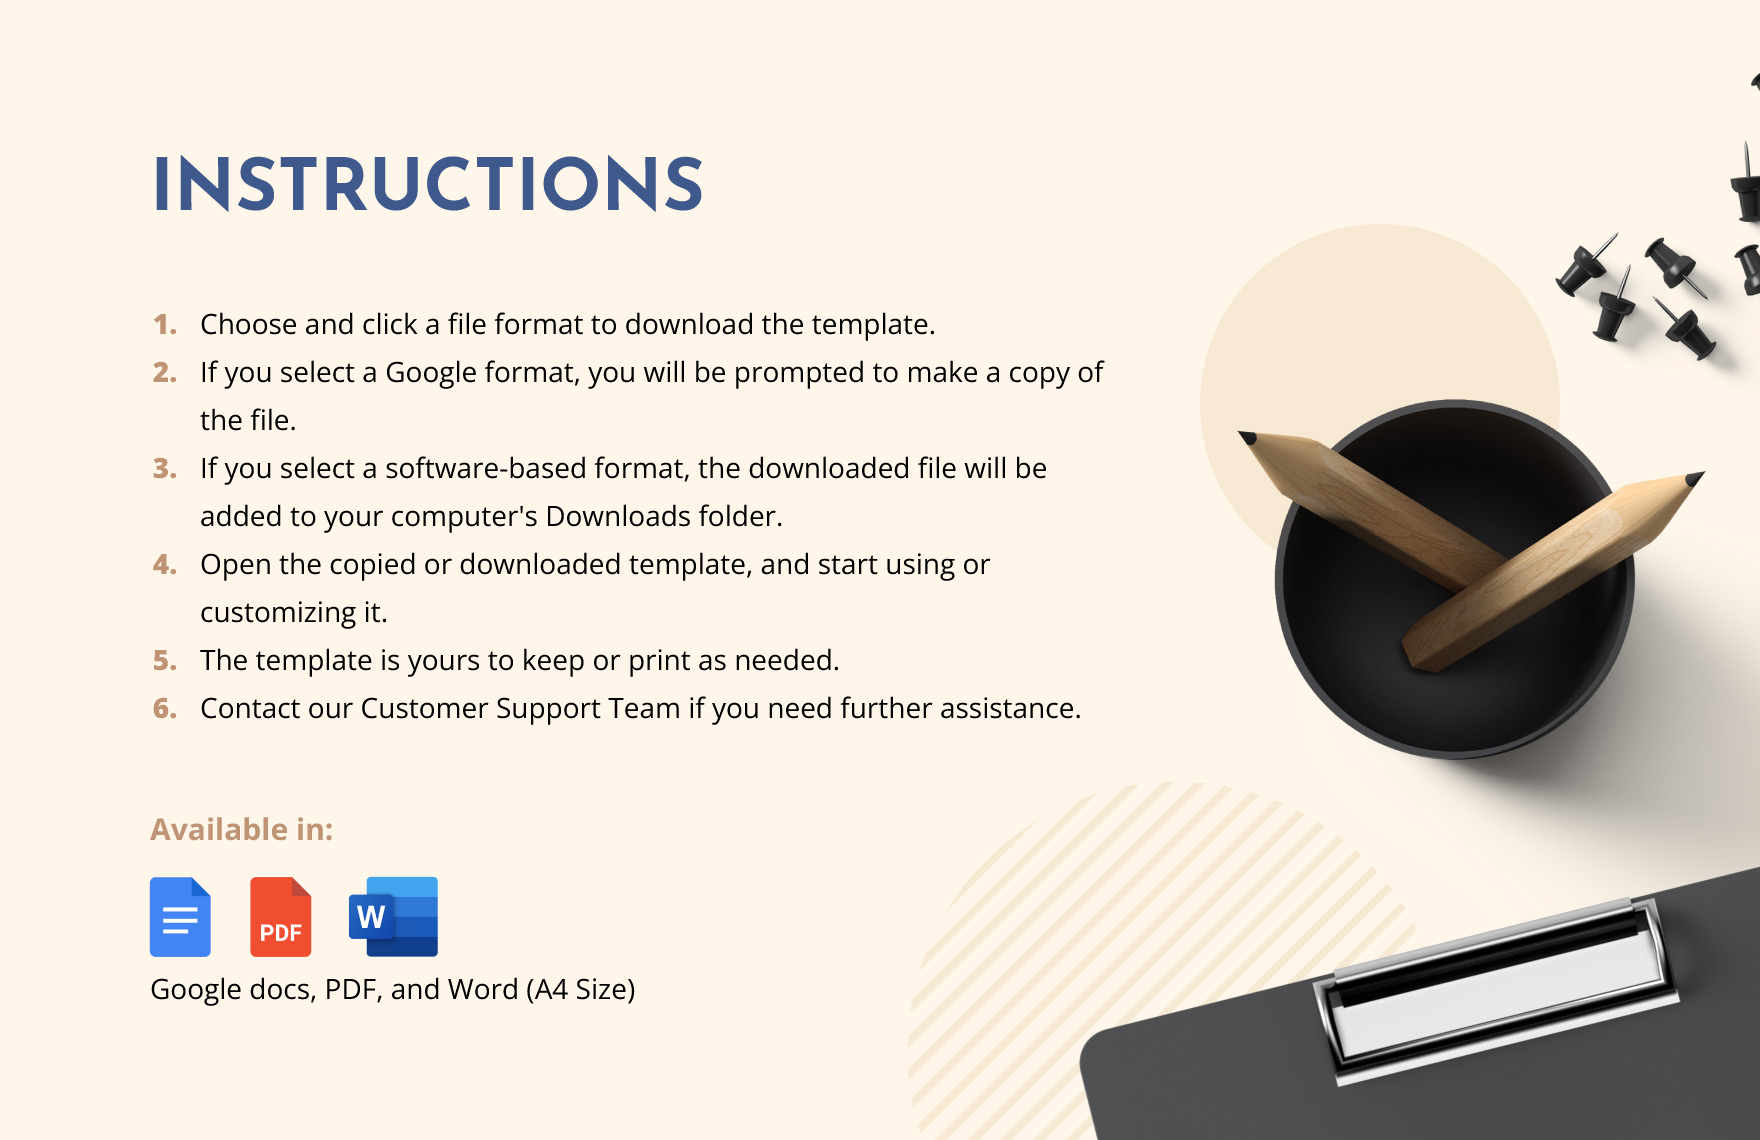 IT Customer Support Policy and Procedure Manual Template